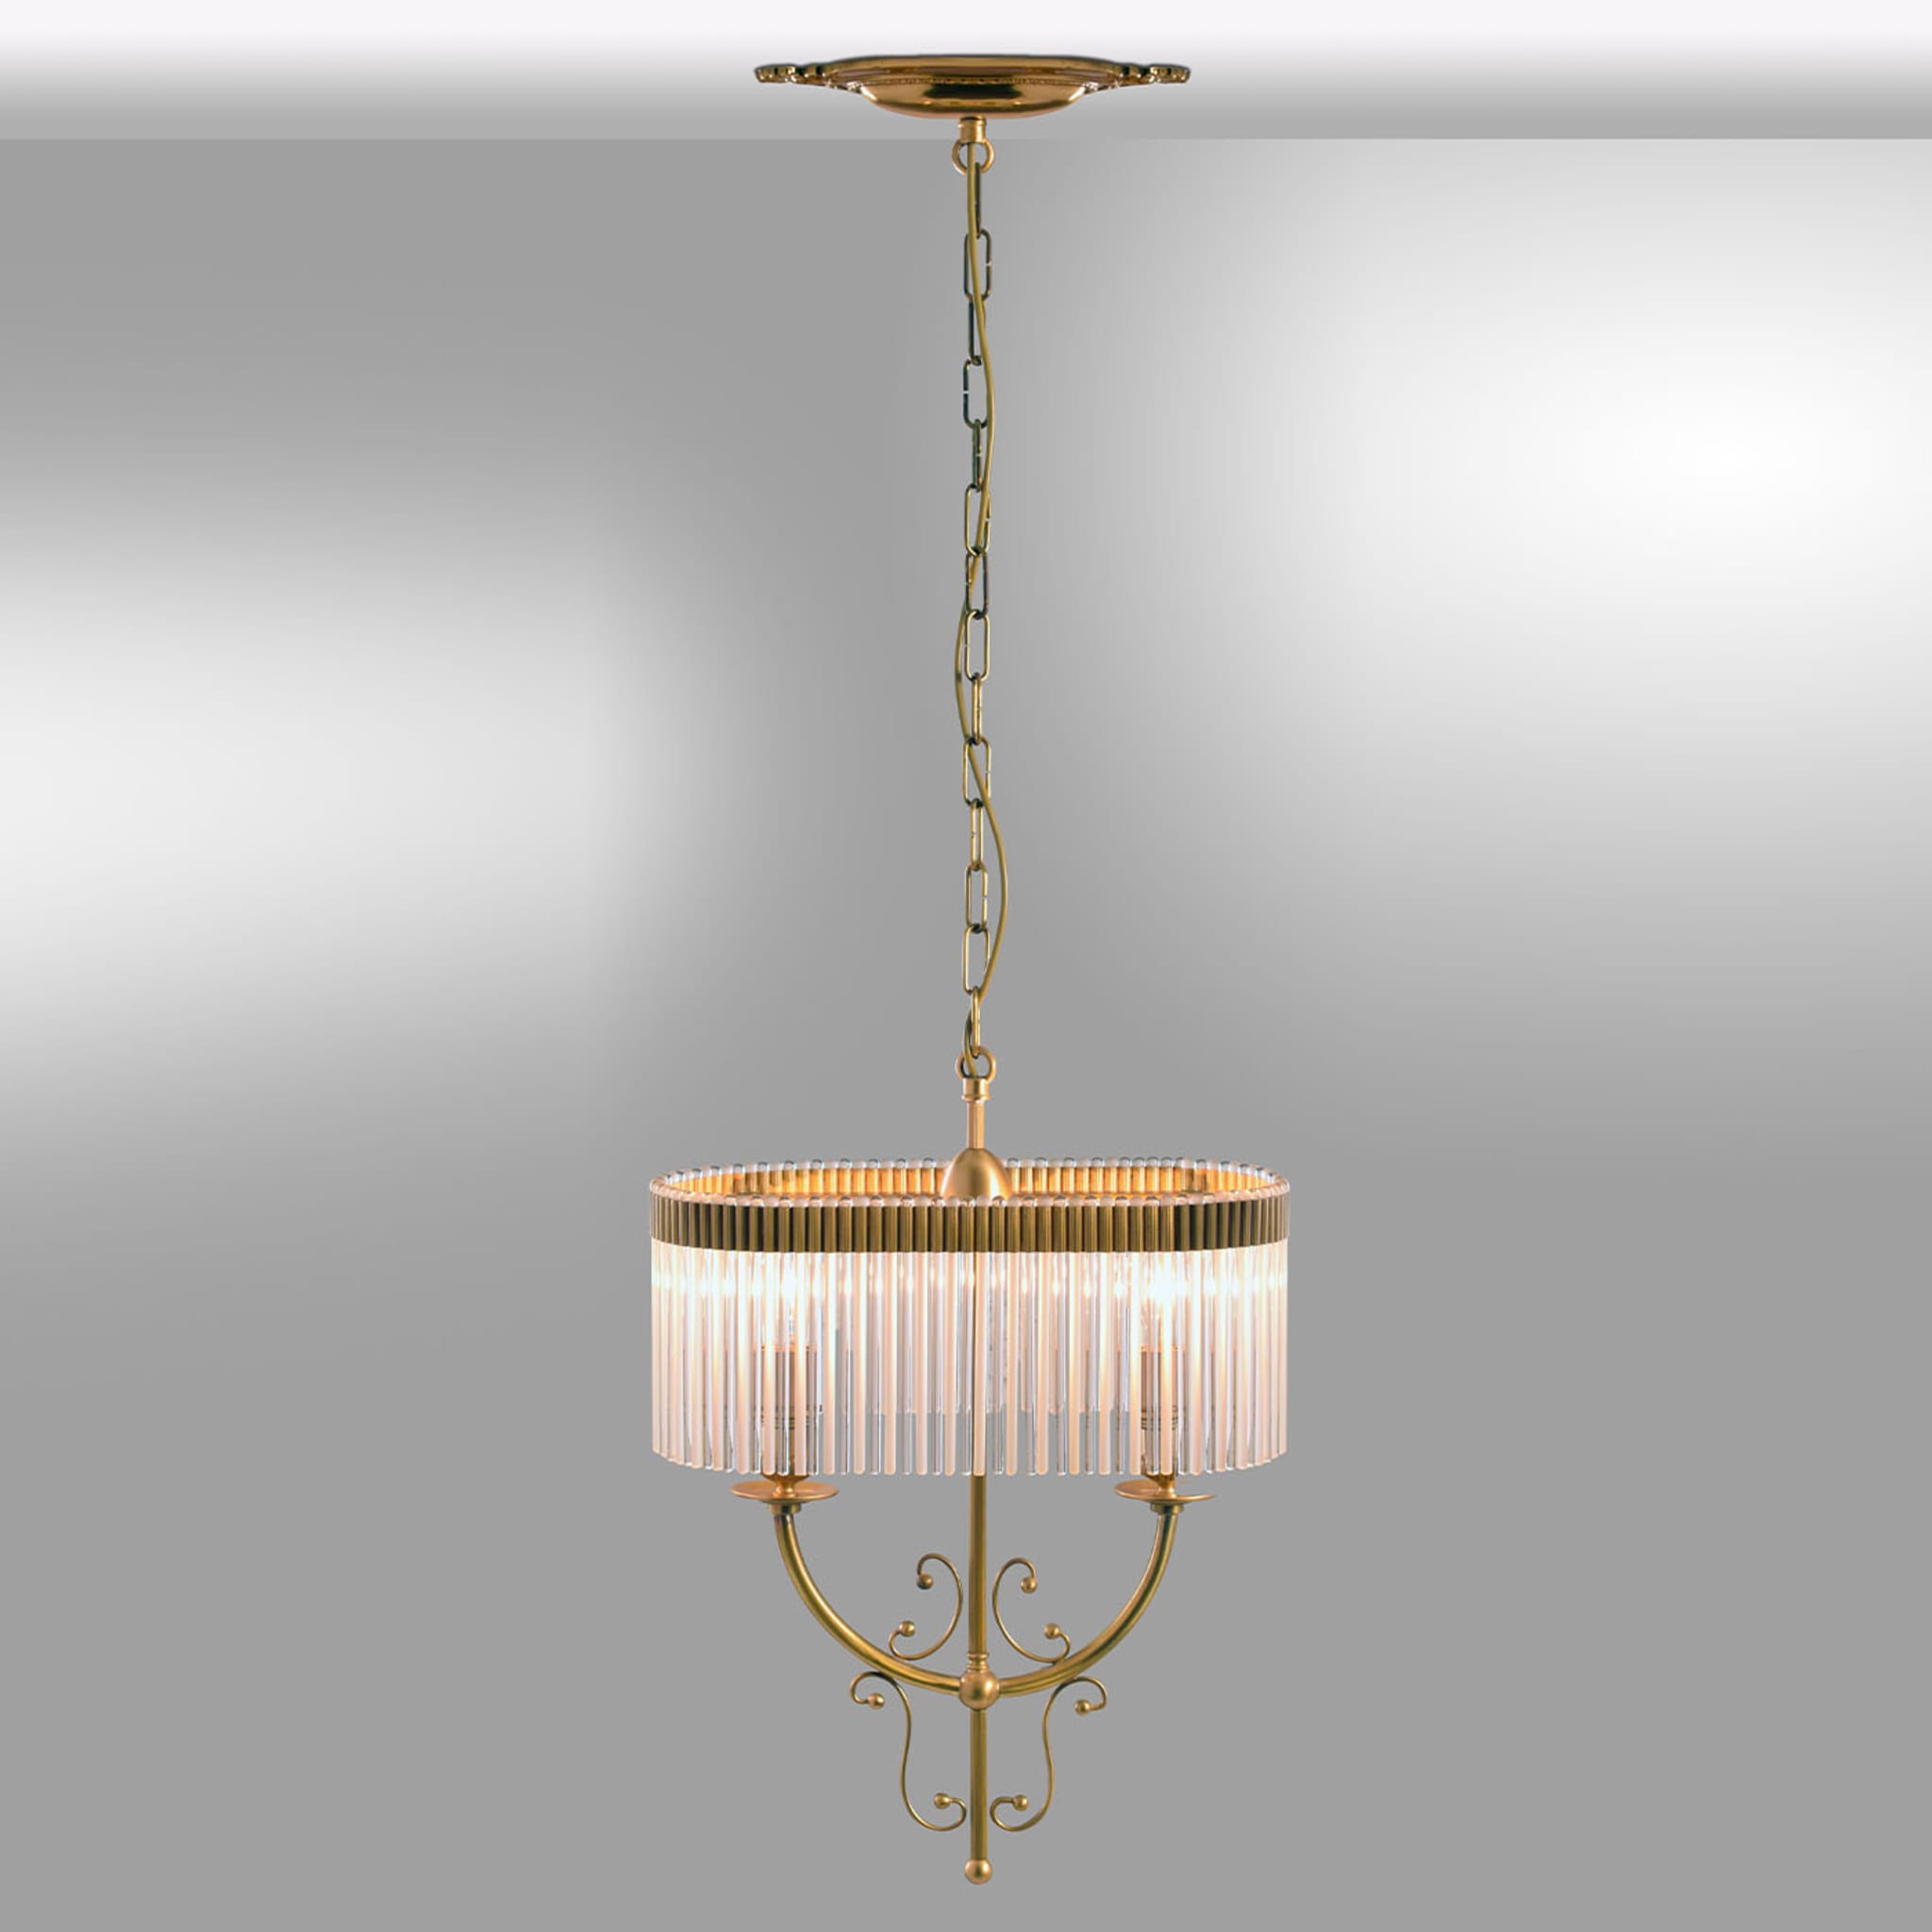 Seicento 2-Light Chandelier by Luca Bussacchini - Alternative view 1